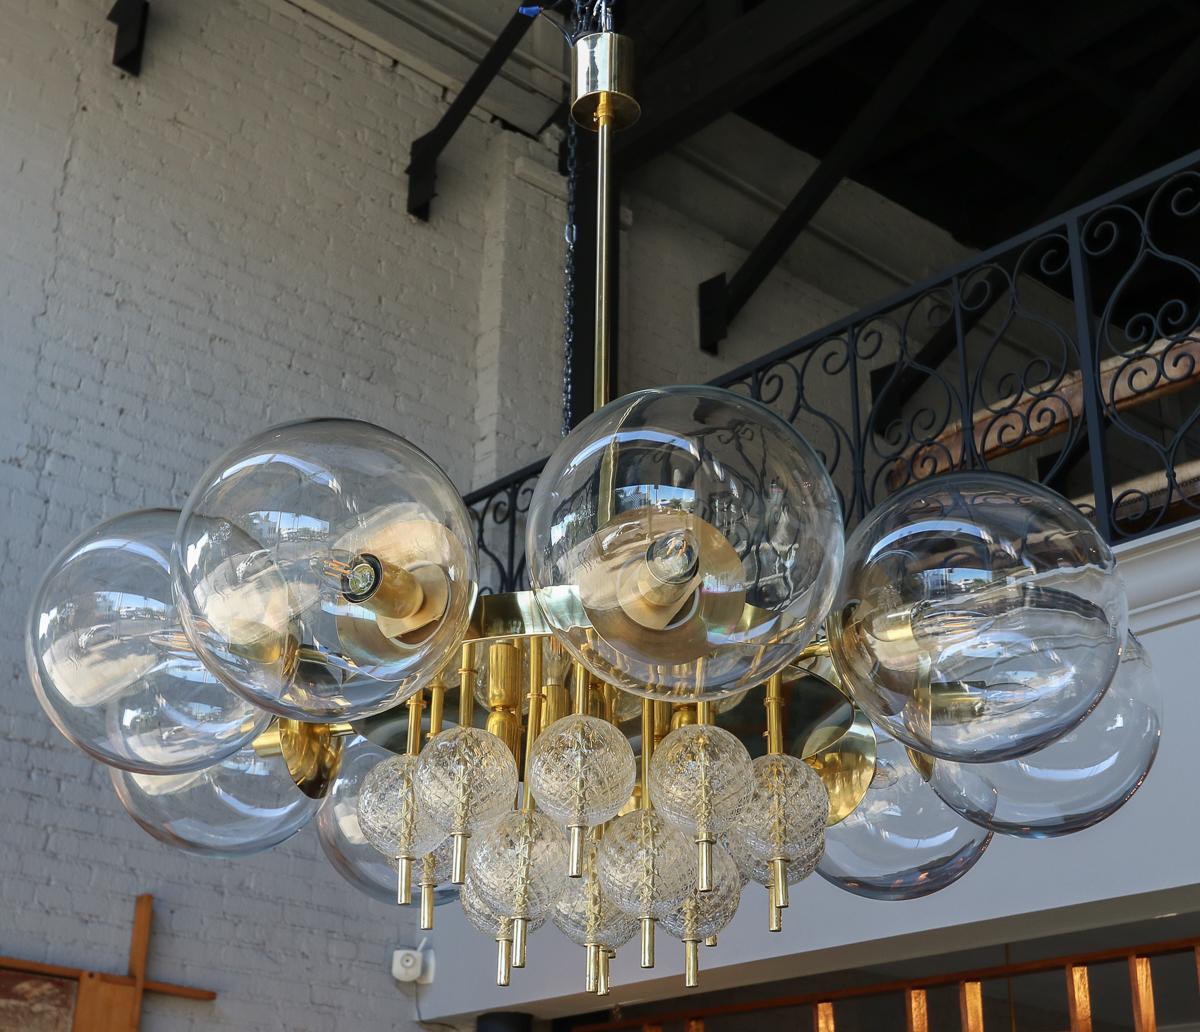 Custom midcentury style chandelier with brass frame and an outer ring of clear glass balls and inner ring of textured clear glass balls by Adesso Imports. Can be done in different sizes and finishes.